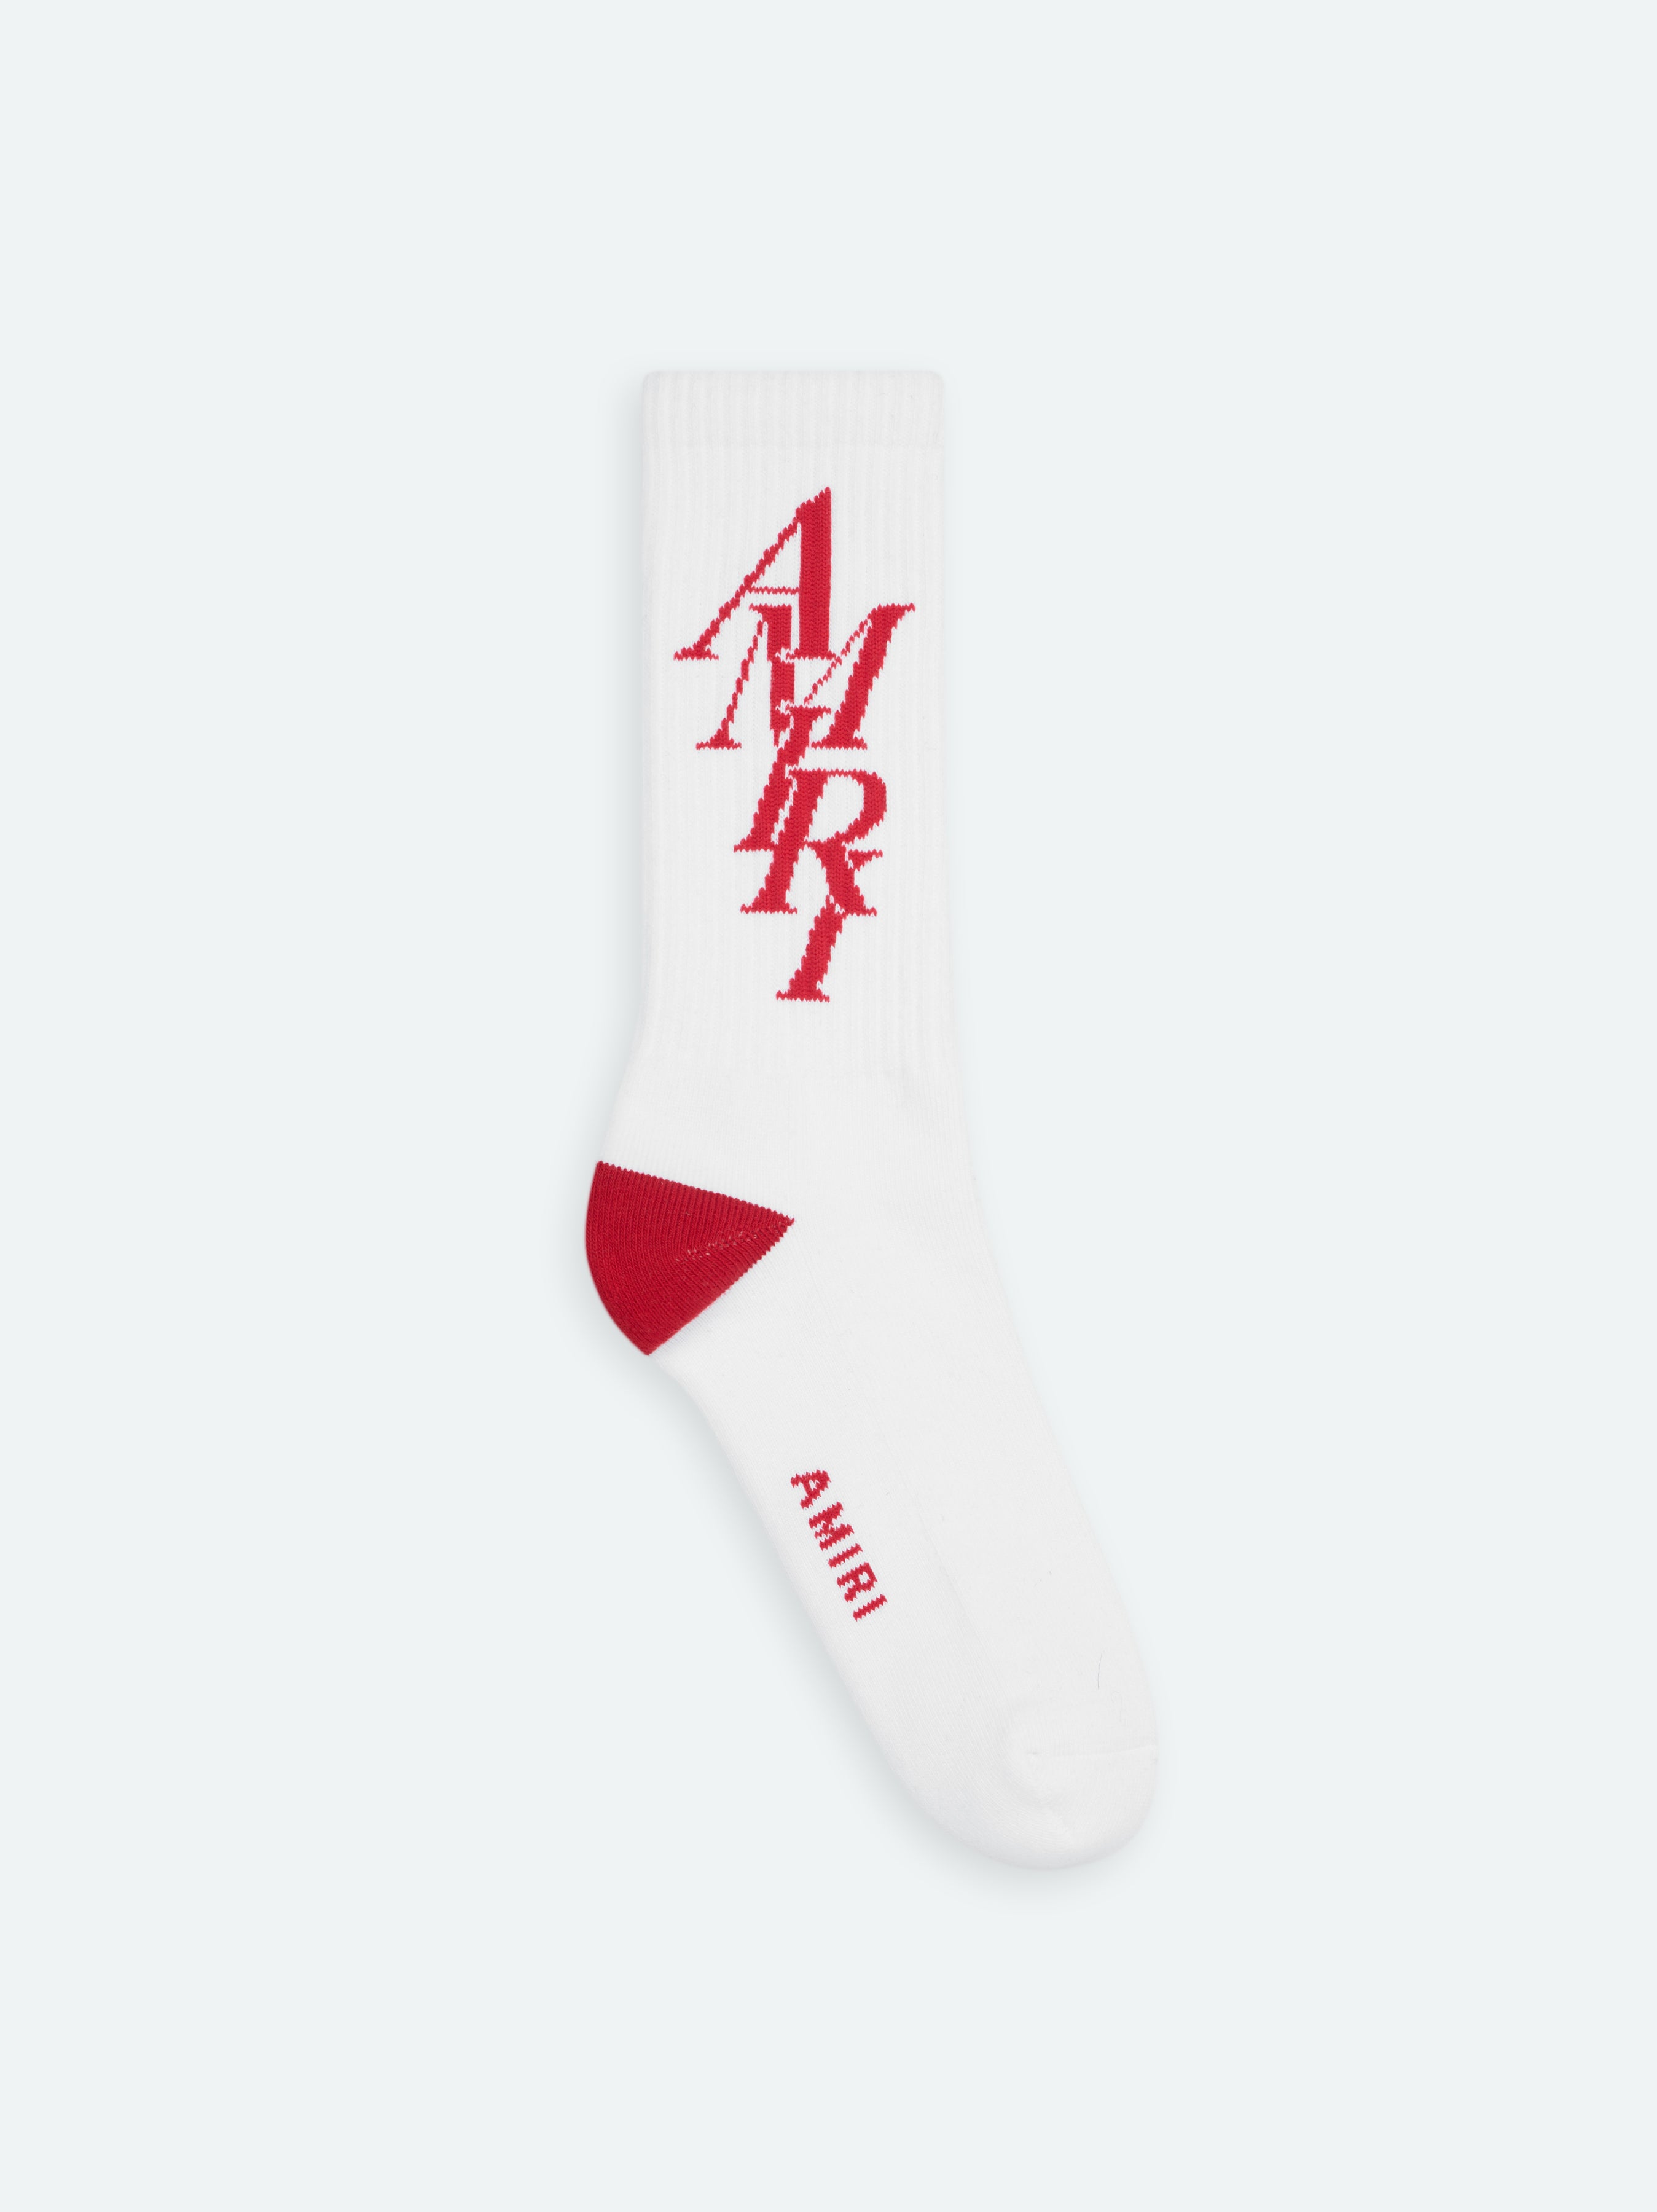 Product AMIRI STACK SOCK - White/Red featured image